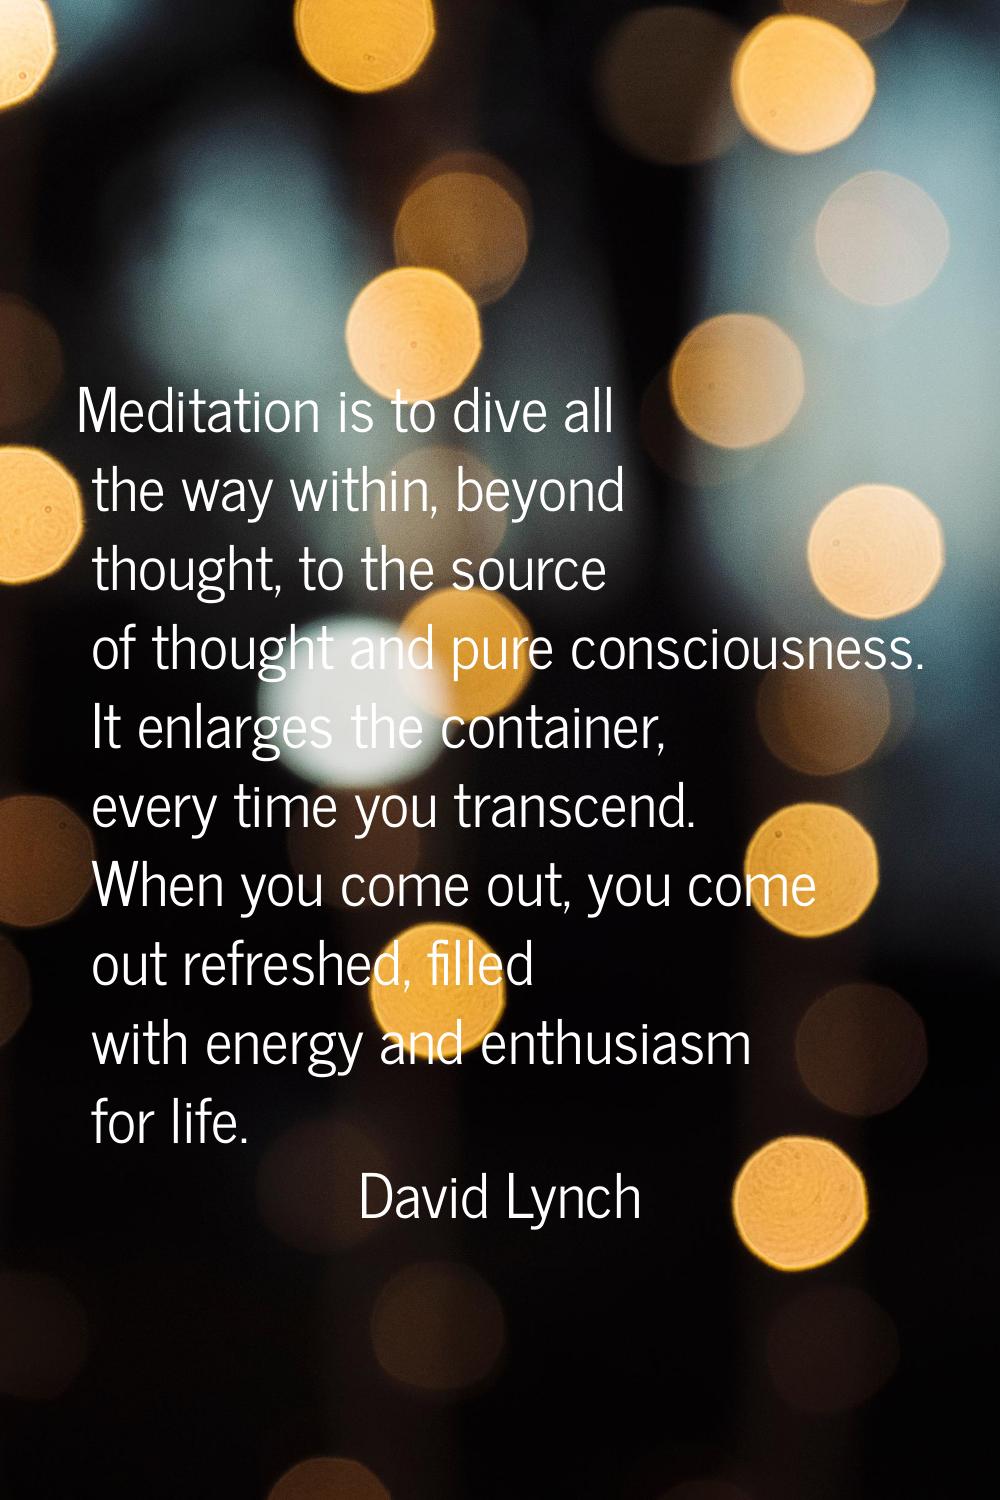 Meditation is to dive all the way within, beyond thought, to the source of thought and pure conscio